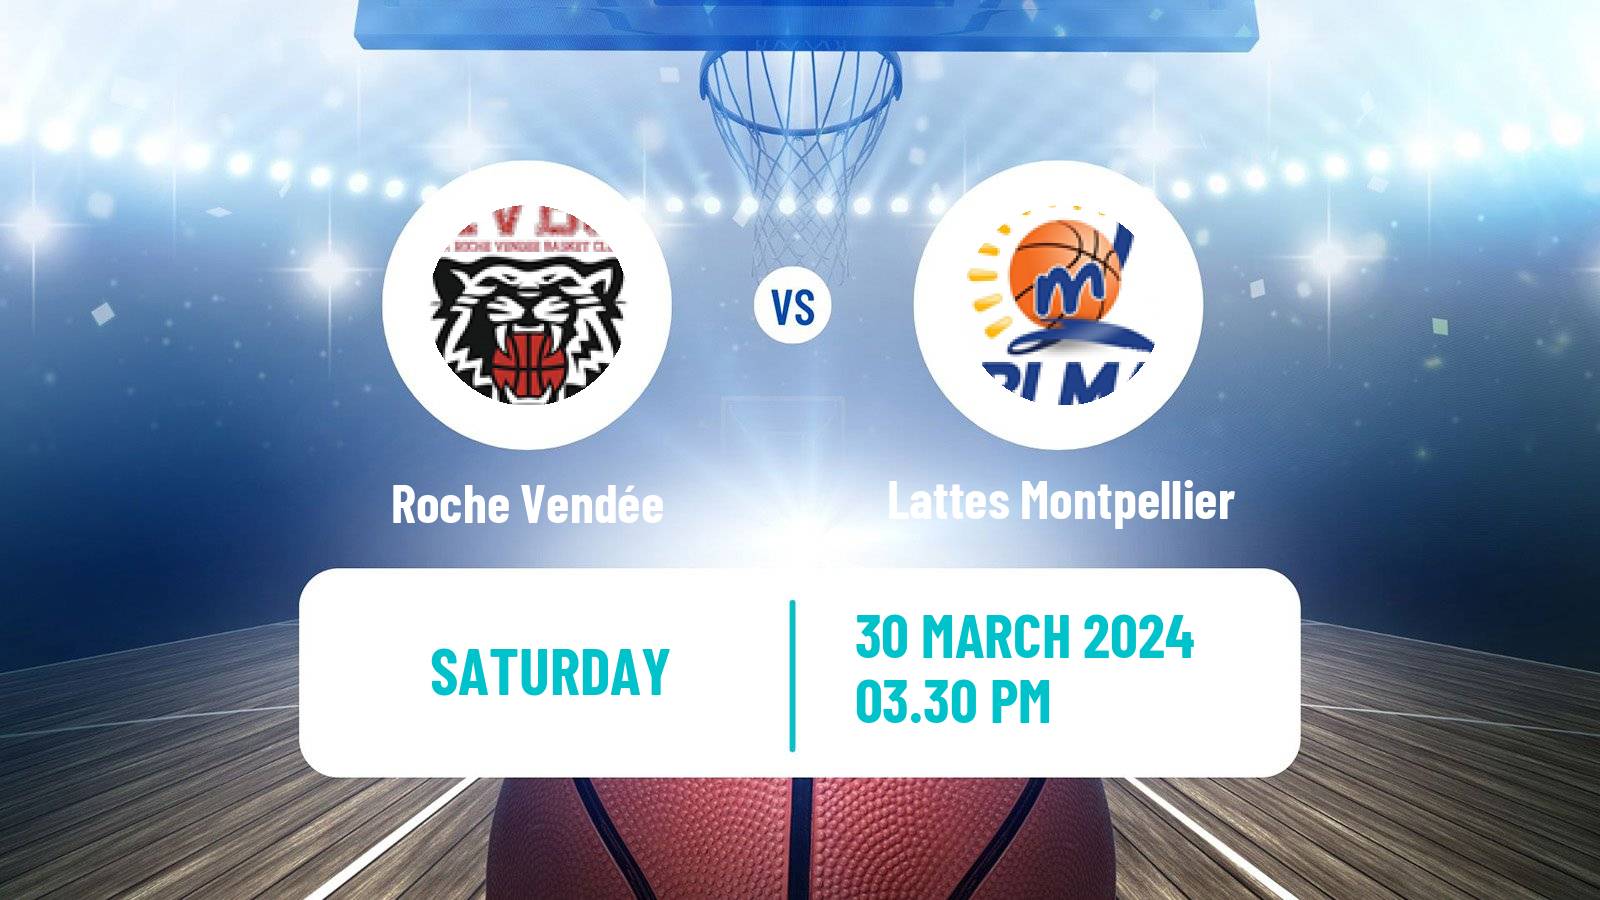 Basketball French LFB Roche Vendée - Lattes Montpellier